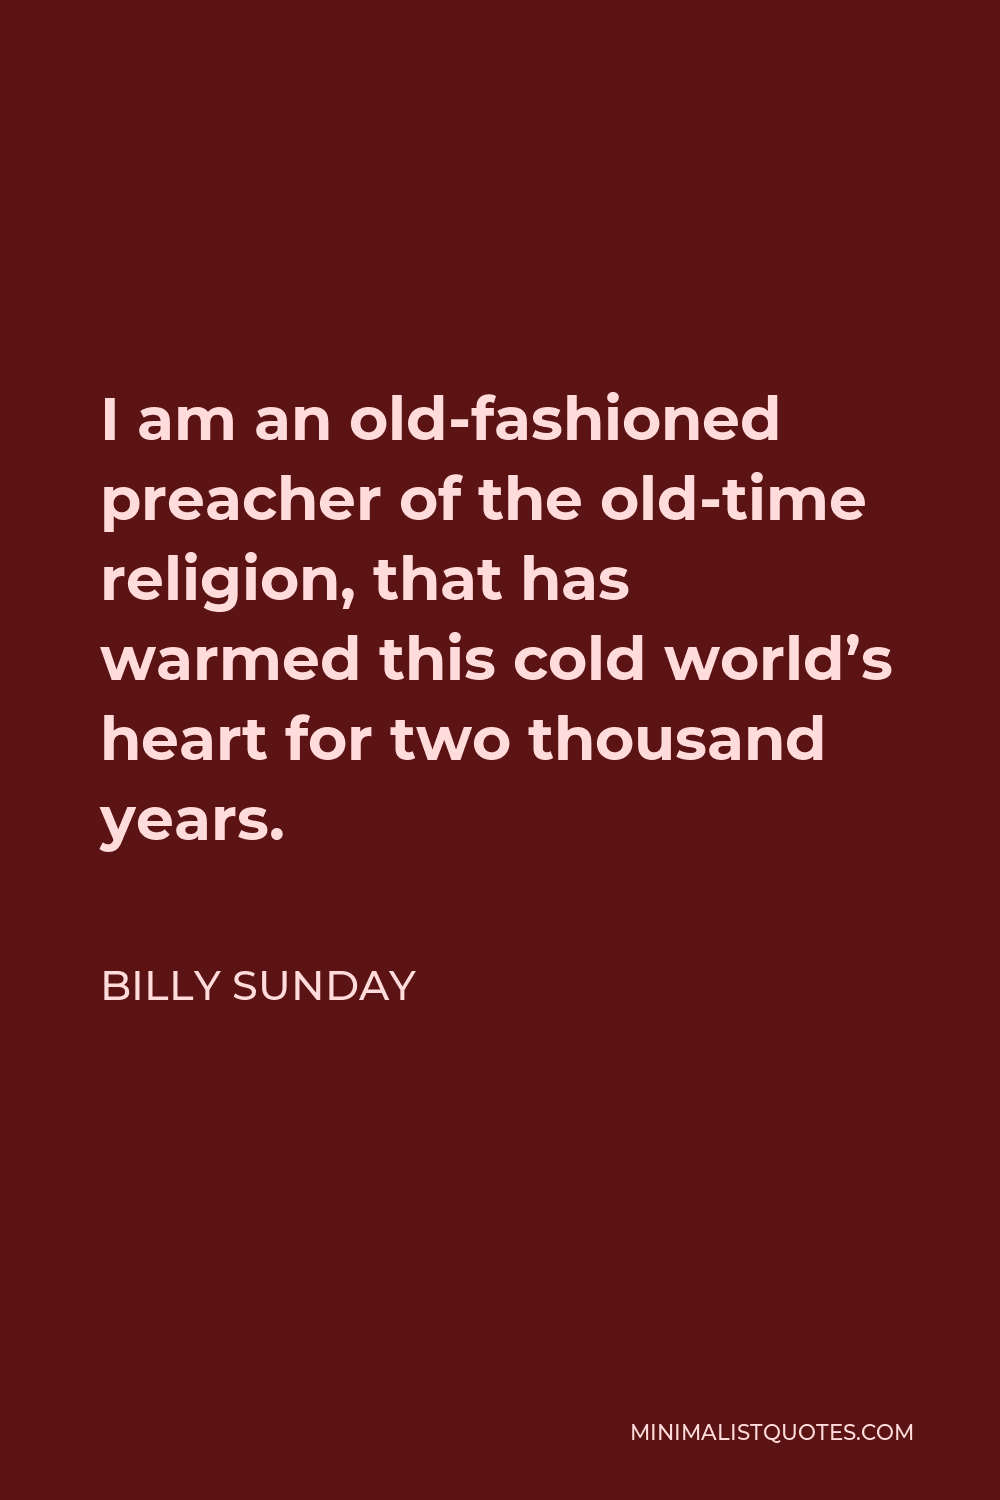 Billy Sunday Quote - I am an old-fashioned preacher of the old-time religion, that has warmed this cold world’s heart for two thousand years.